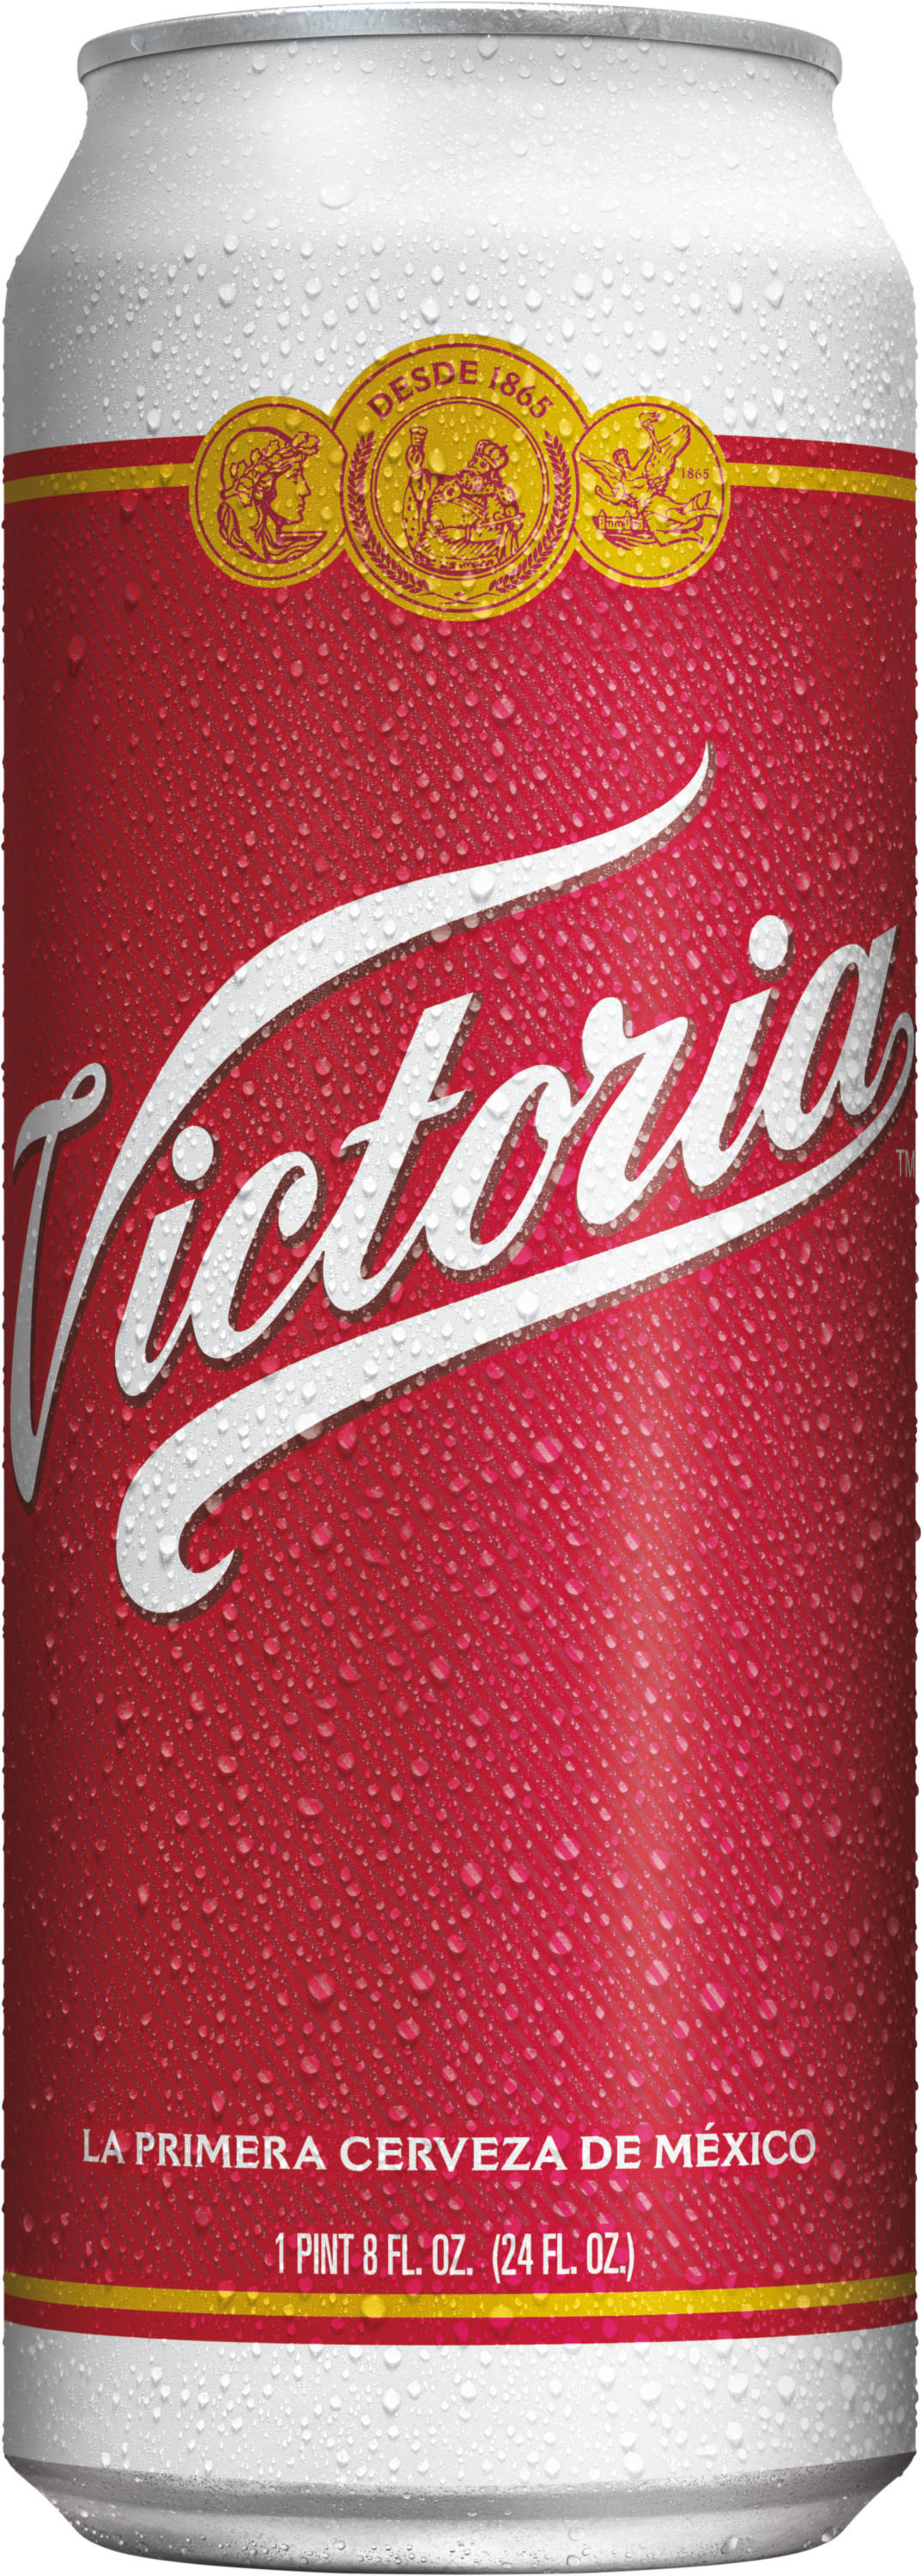 Victoria Amber Lager Mexican Beer Can 24 oz